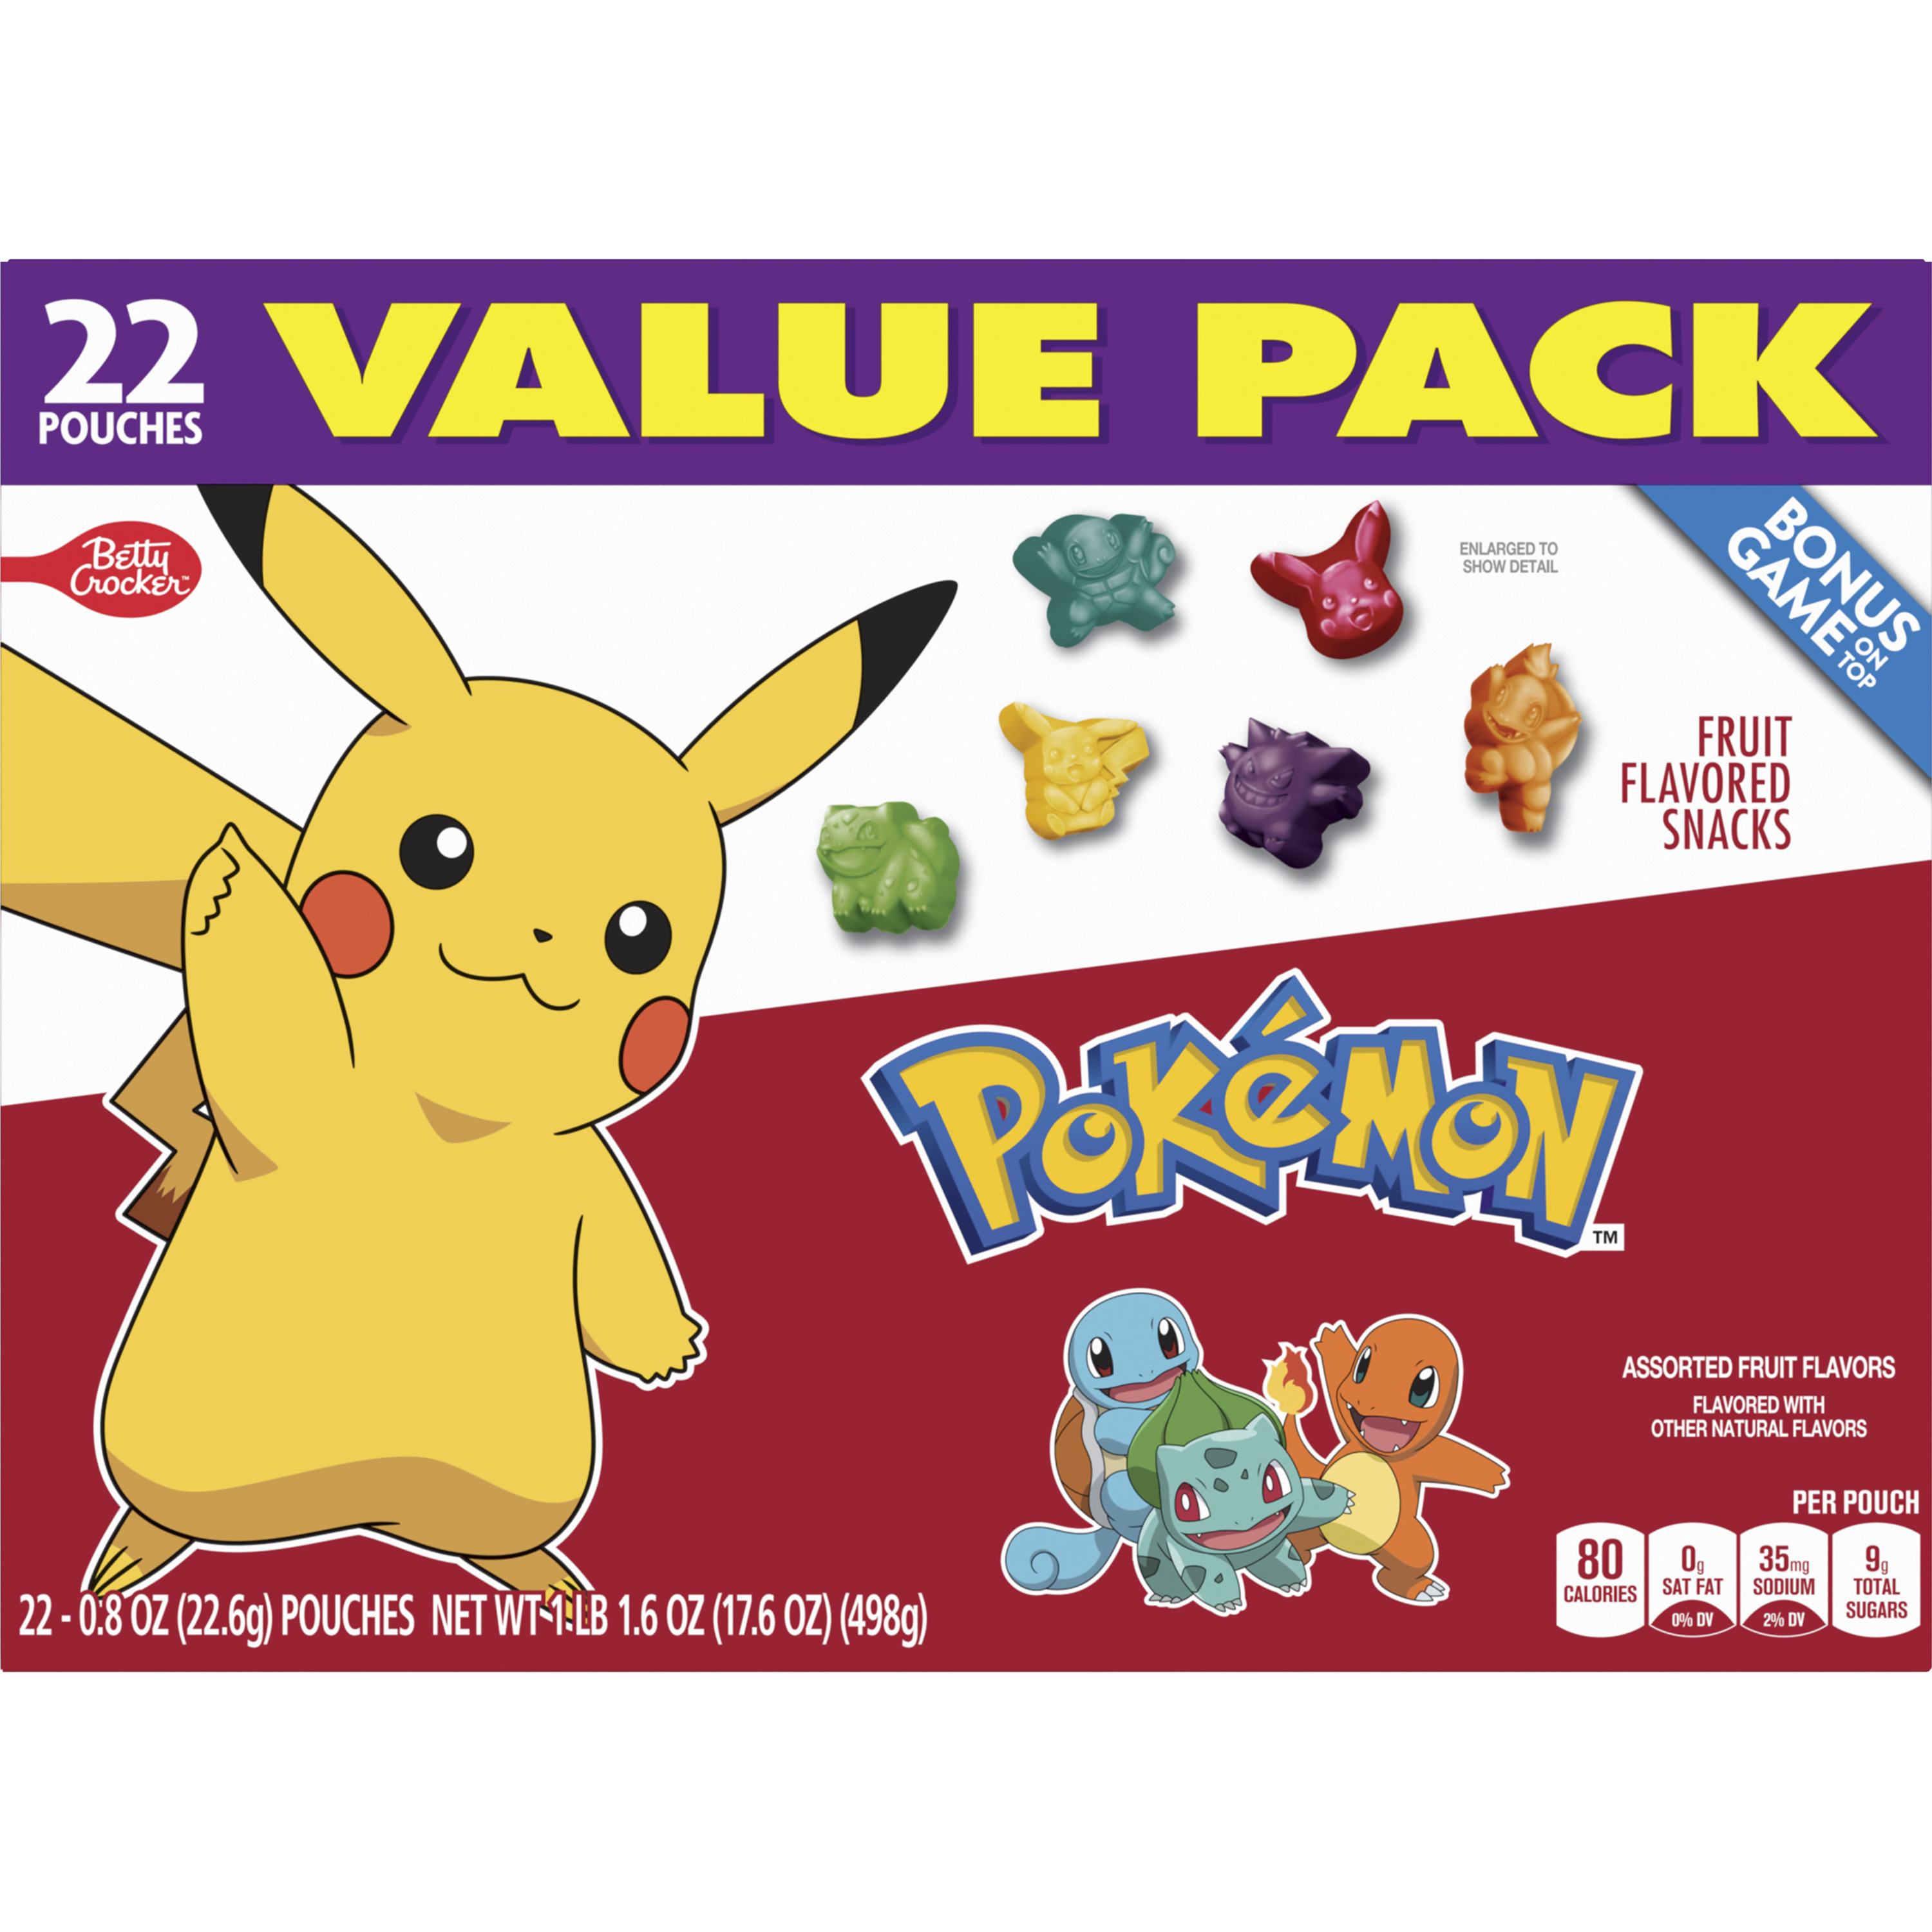 Pokemon Fruit Flavored Snacks, Treat Pouches, Value Pack, 22 ct - image 4 of 9